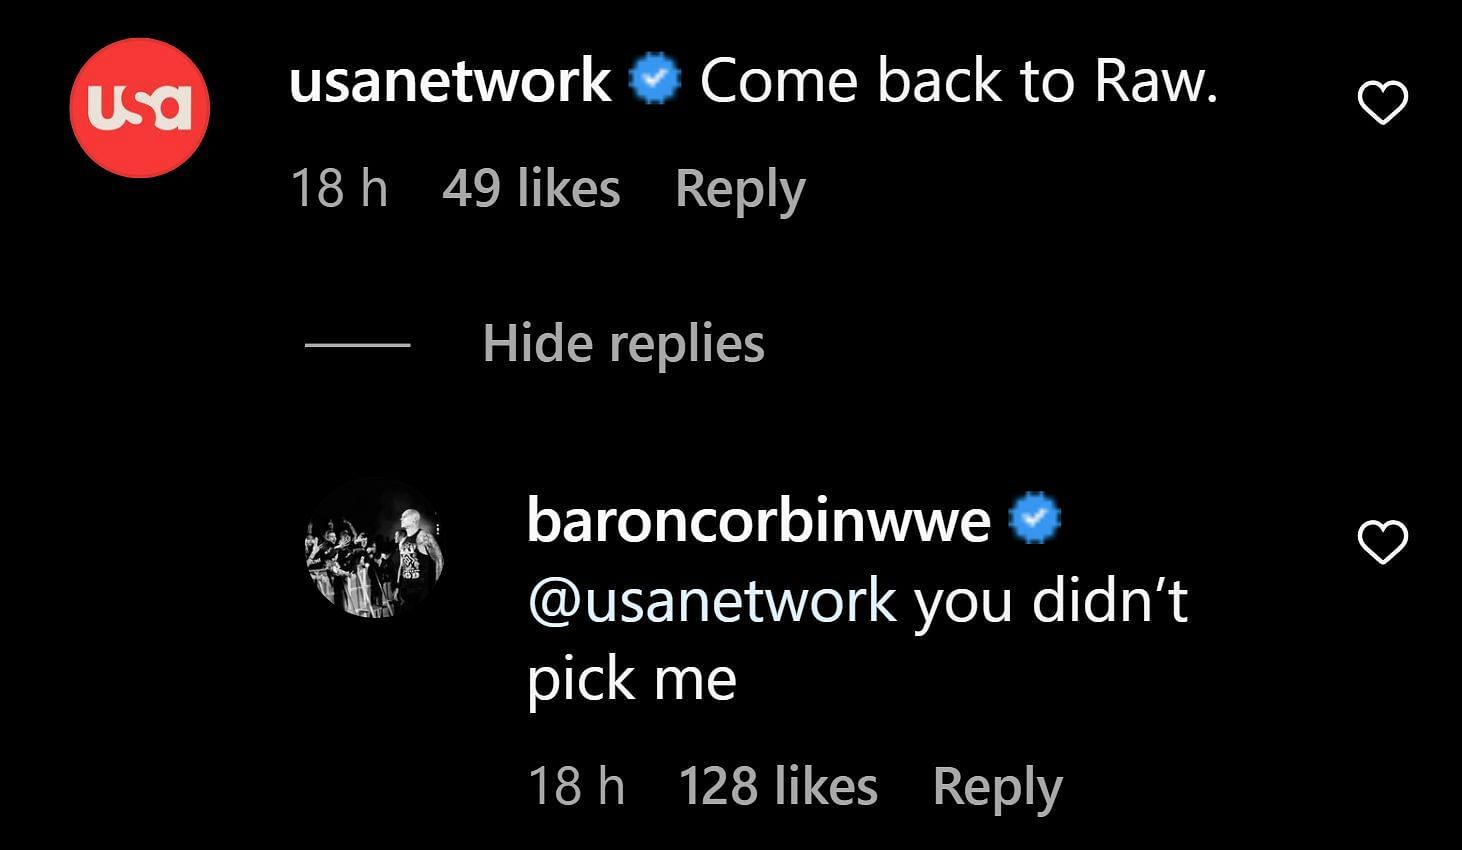 Baron Corbin throws shade after not being picked up by USA Network.